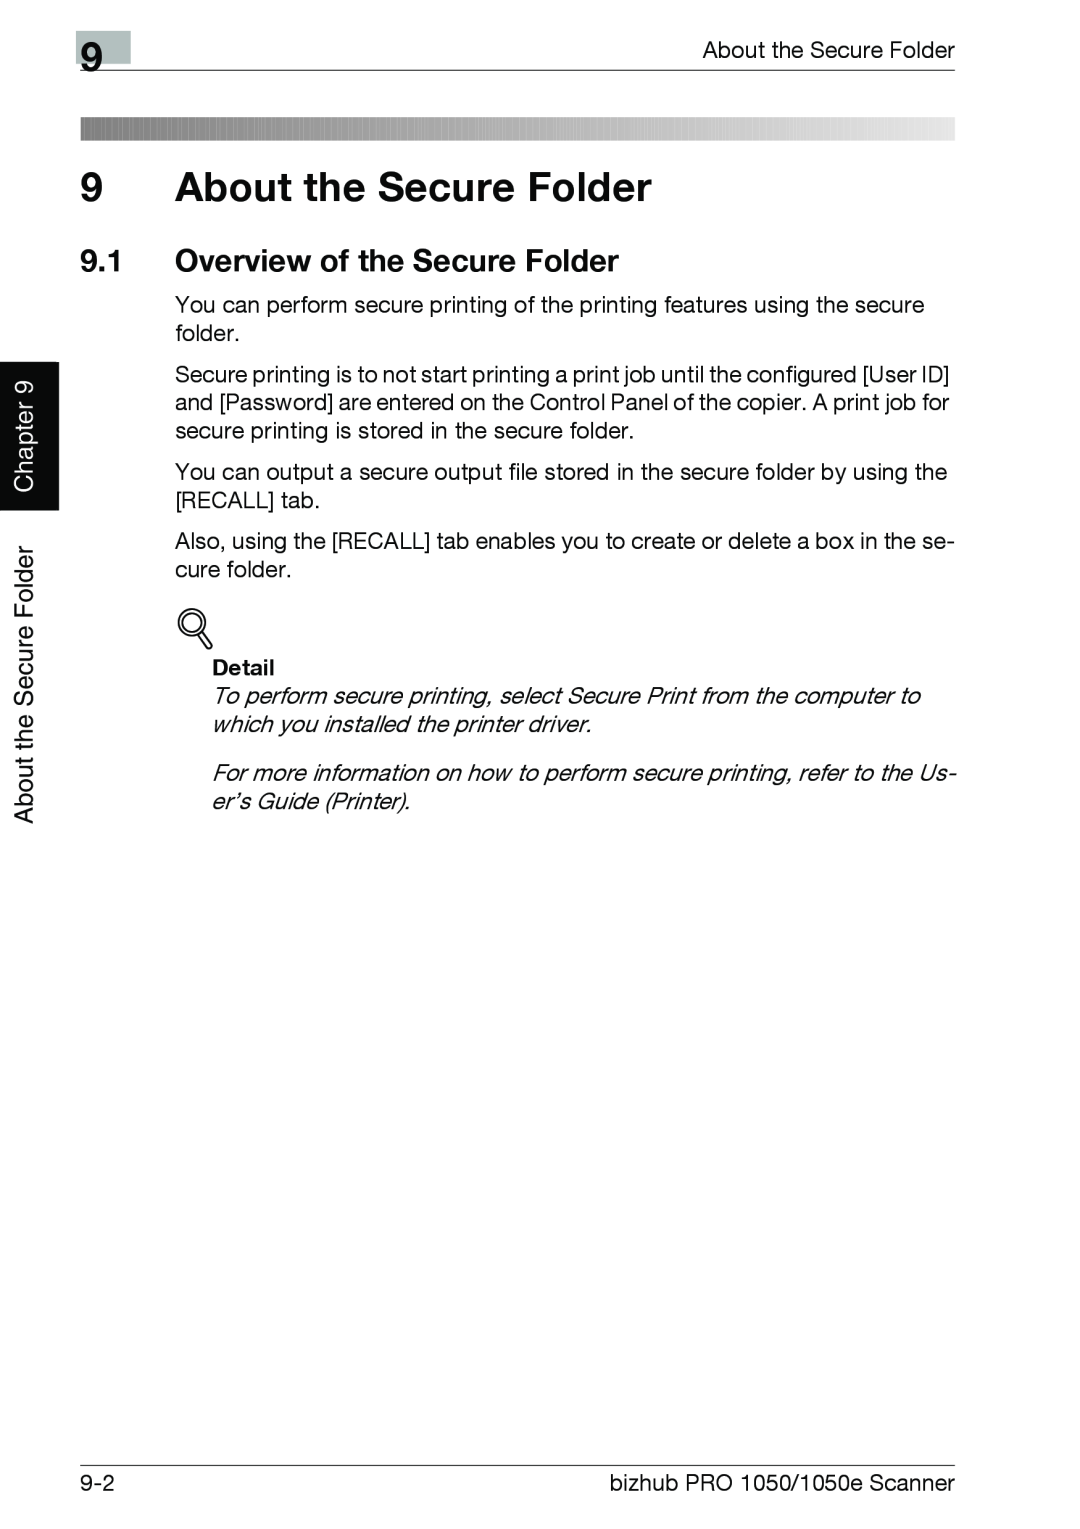 Konica Minolta 1050E appendix About the Secure Folder, 9.1Overview of the Secure Folder, Chapter, Detail 